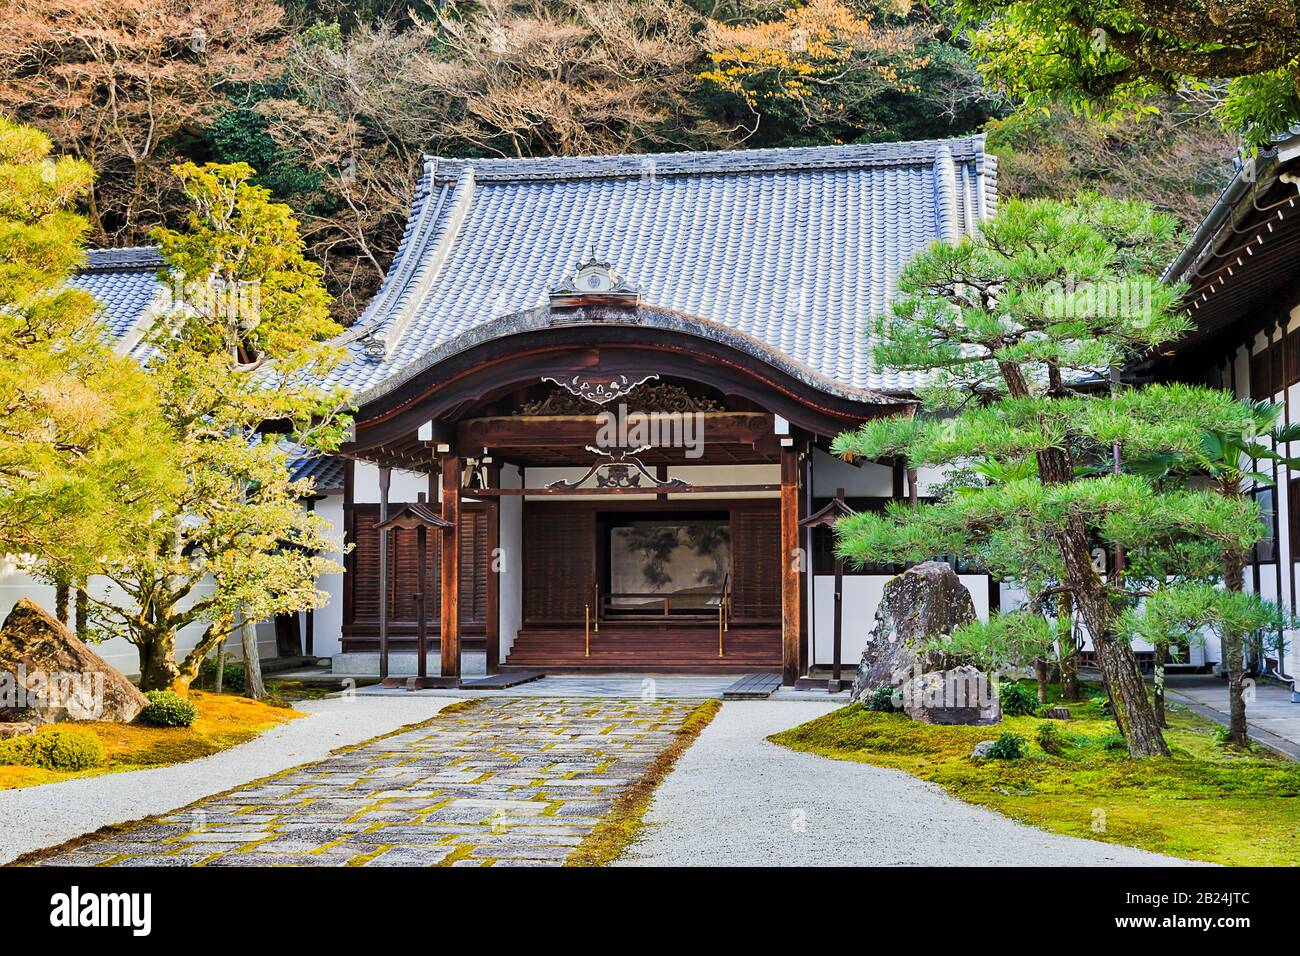 Small historic temple in Nanzen complex of Kyoto city surrounded by green park and traditional Japanese garden with pine trees. Stock Photo